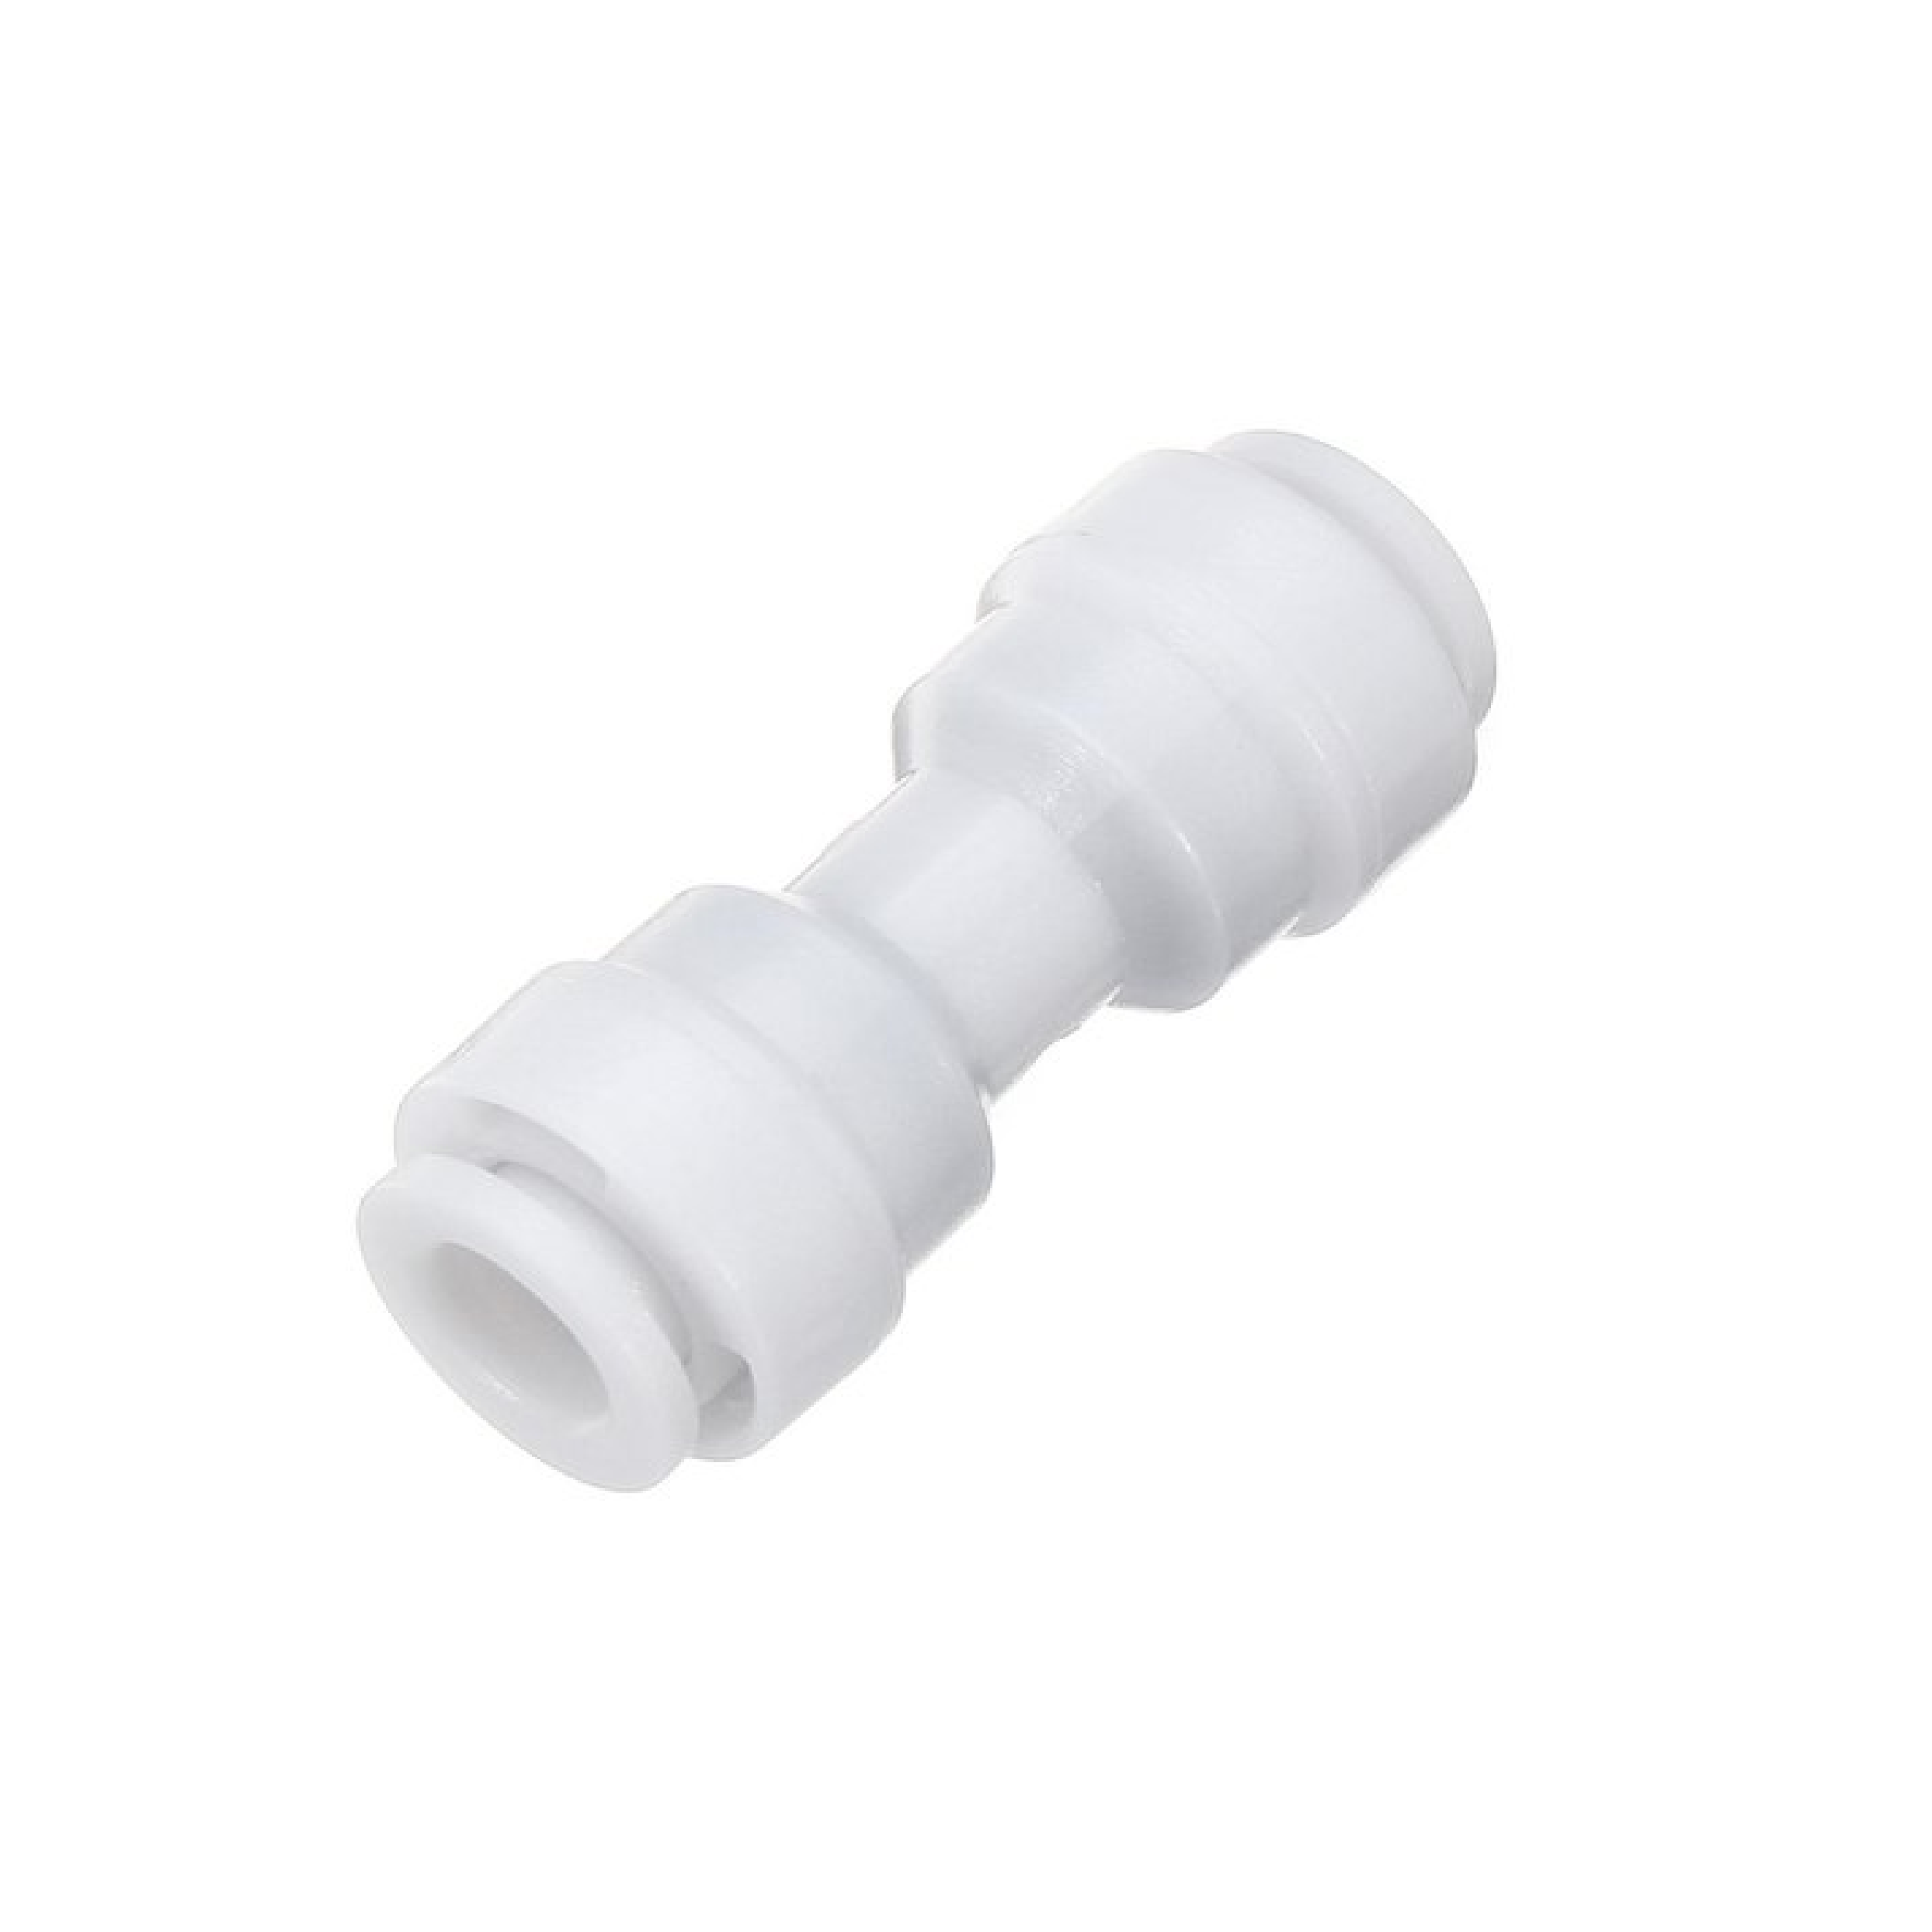 TPC WATER FILTER Straight Connector 1/4" X 1/4" OD Push Fitting